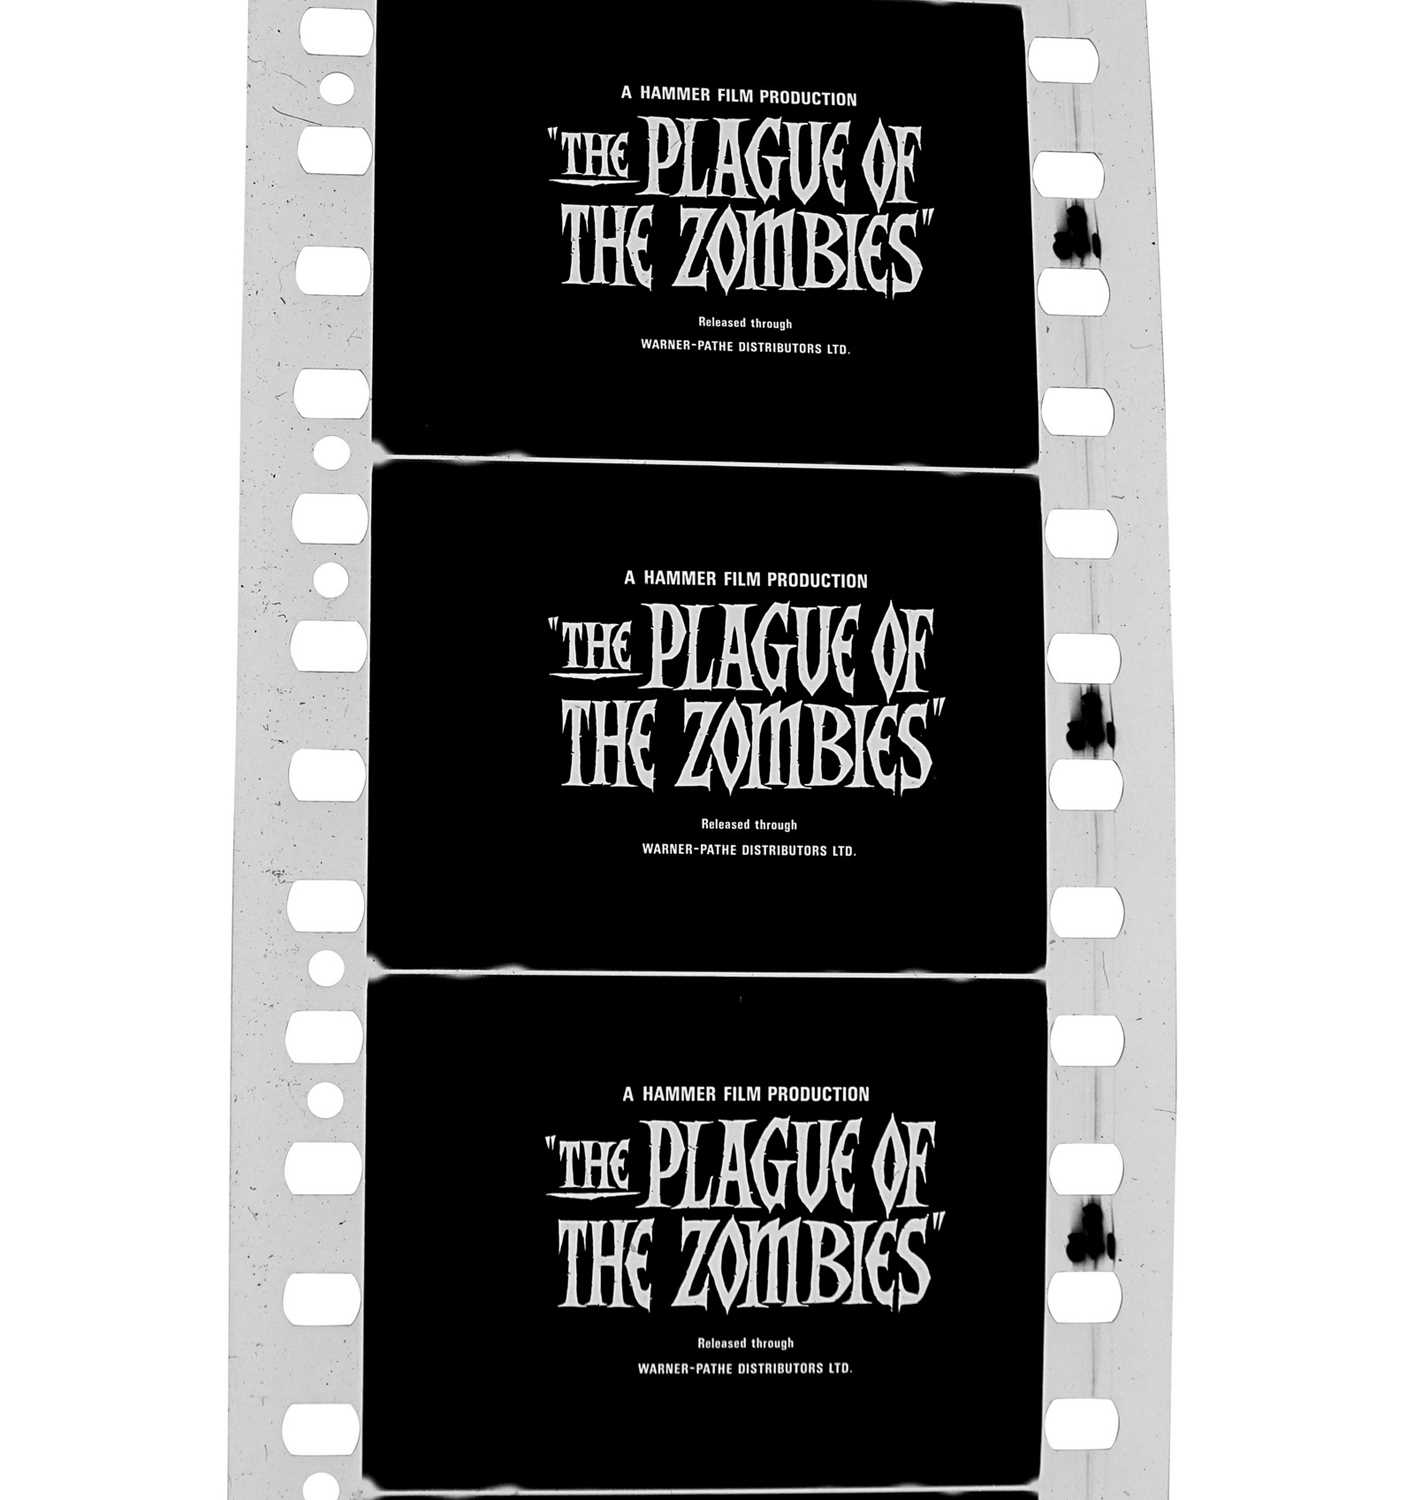 The Plague Of The Zombies (1966) - Image 5 of 5